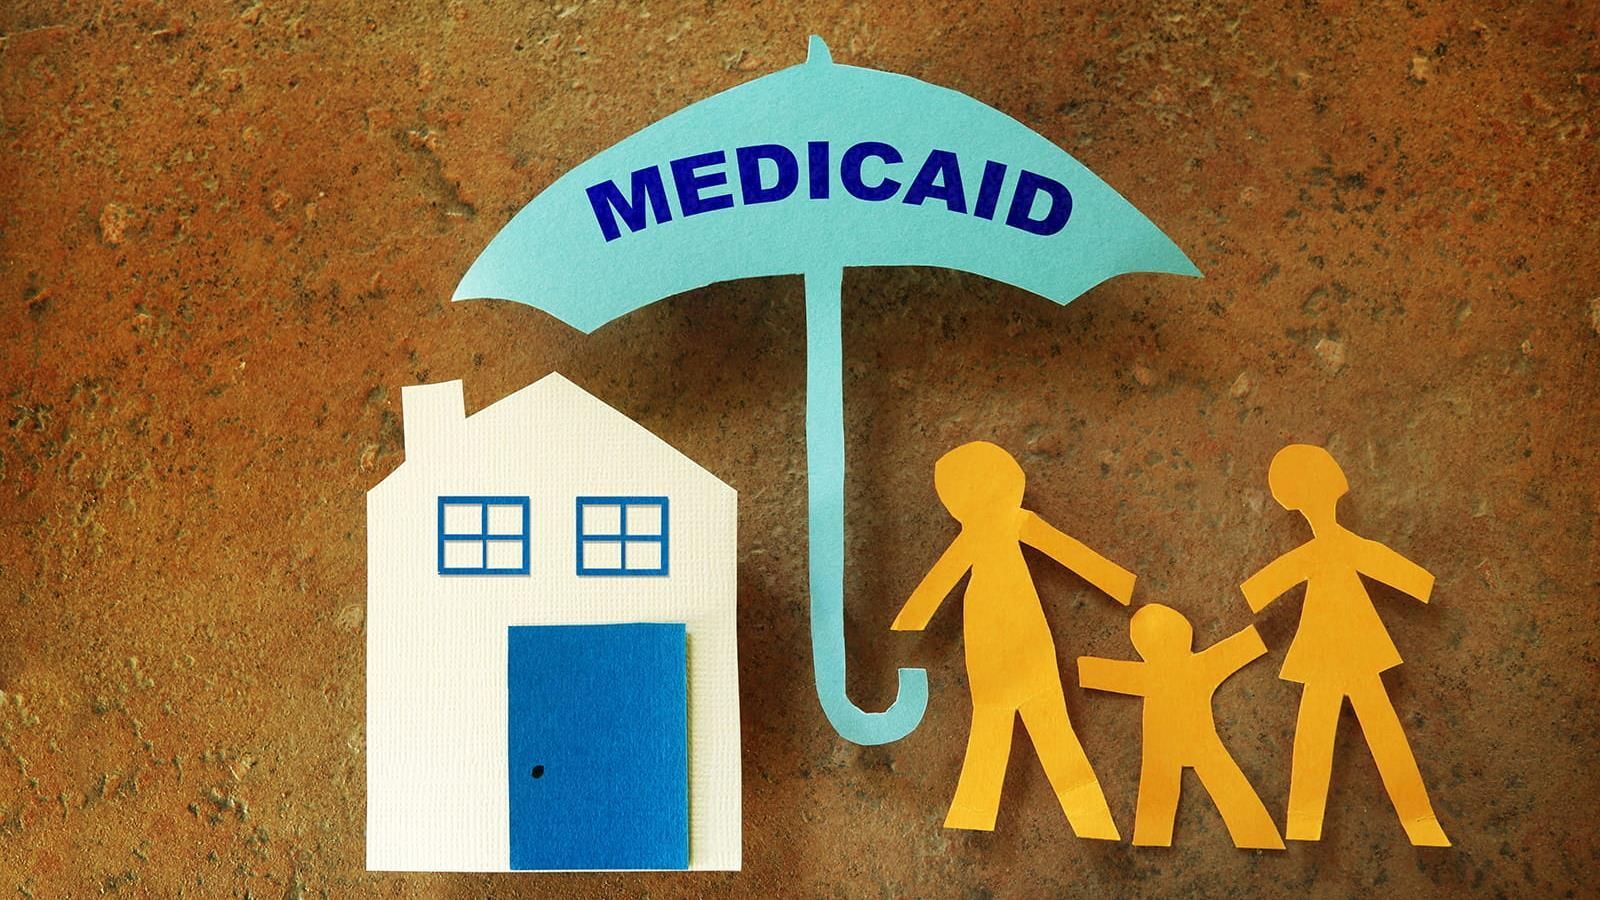 Paper cut outs of a home and family of three under a Medicaid umbrella.